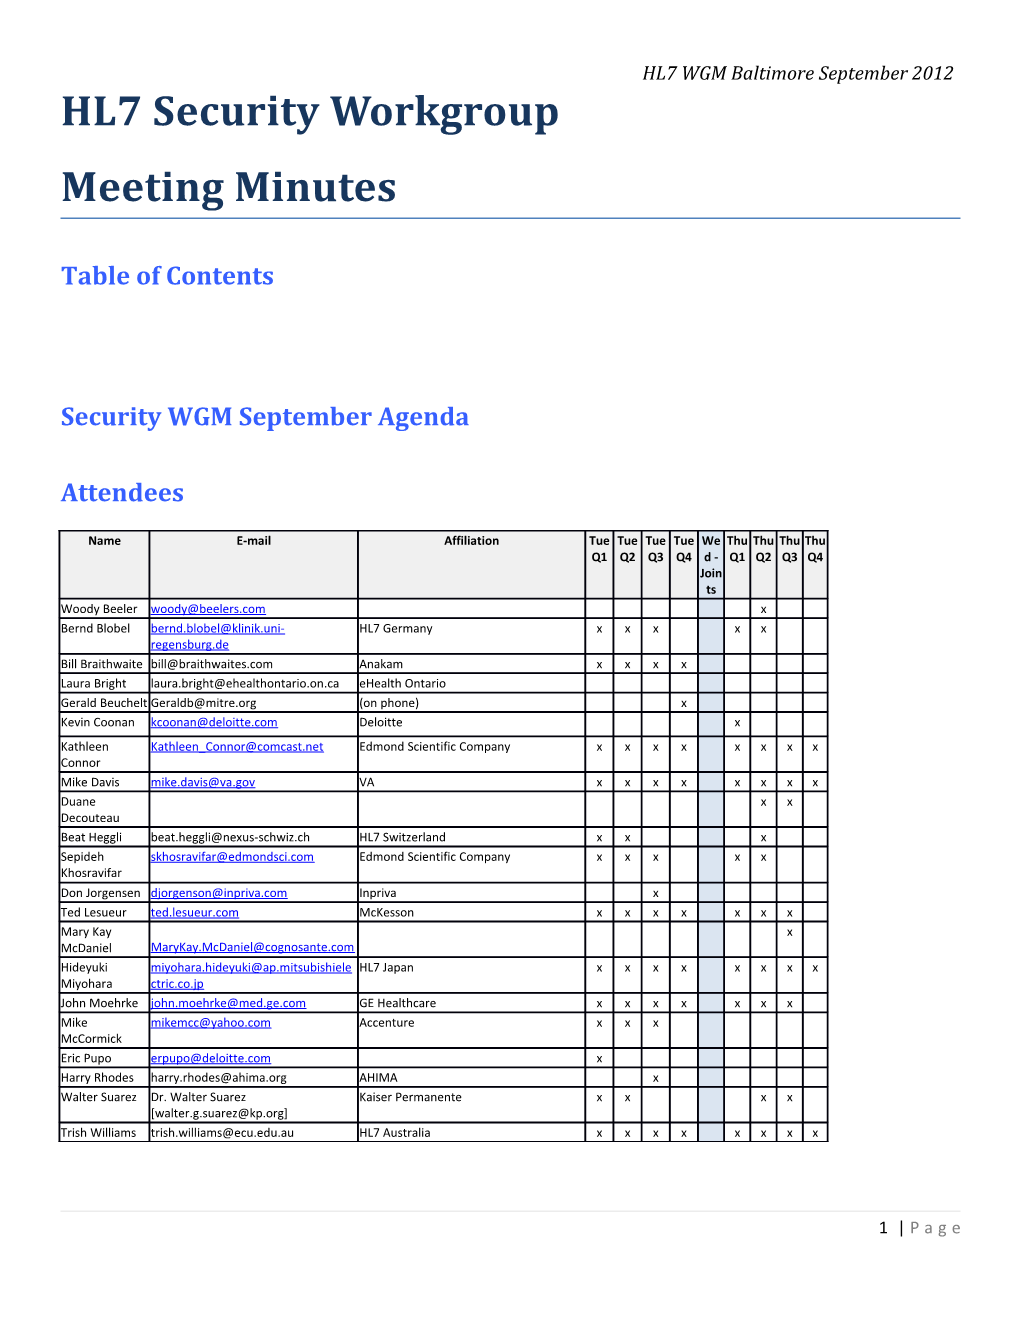 HL7 Security Workgroup